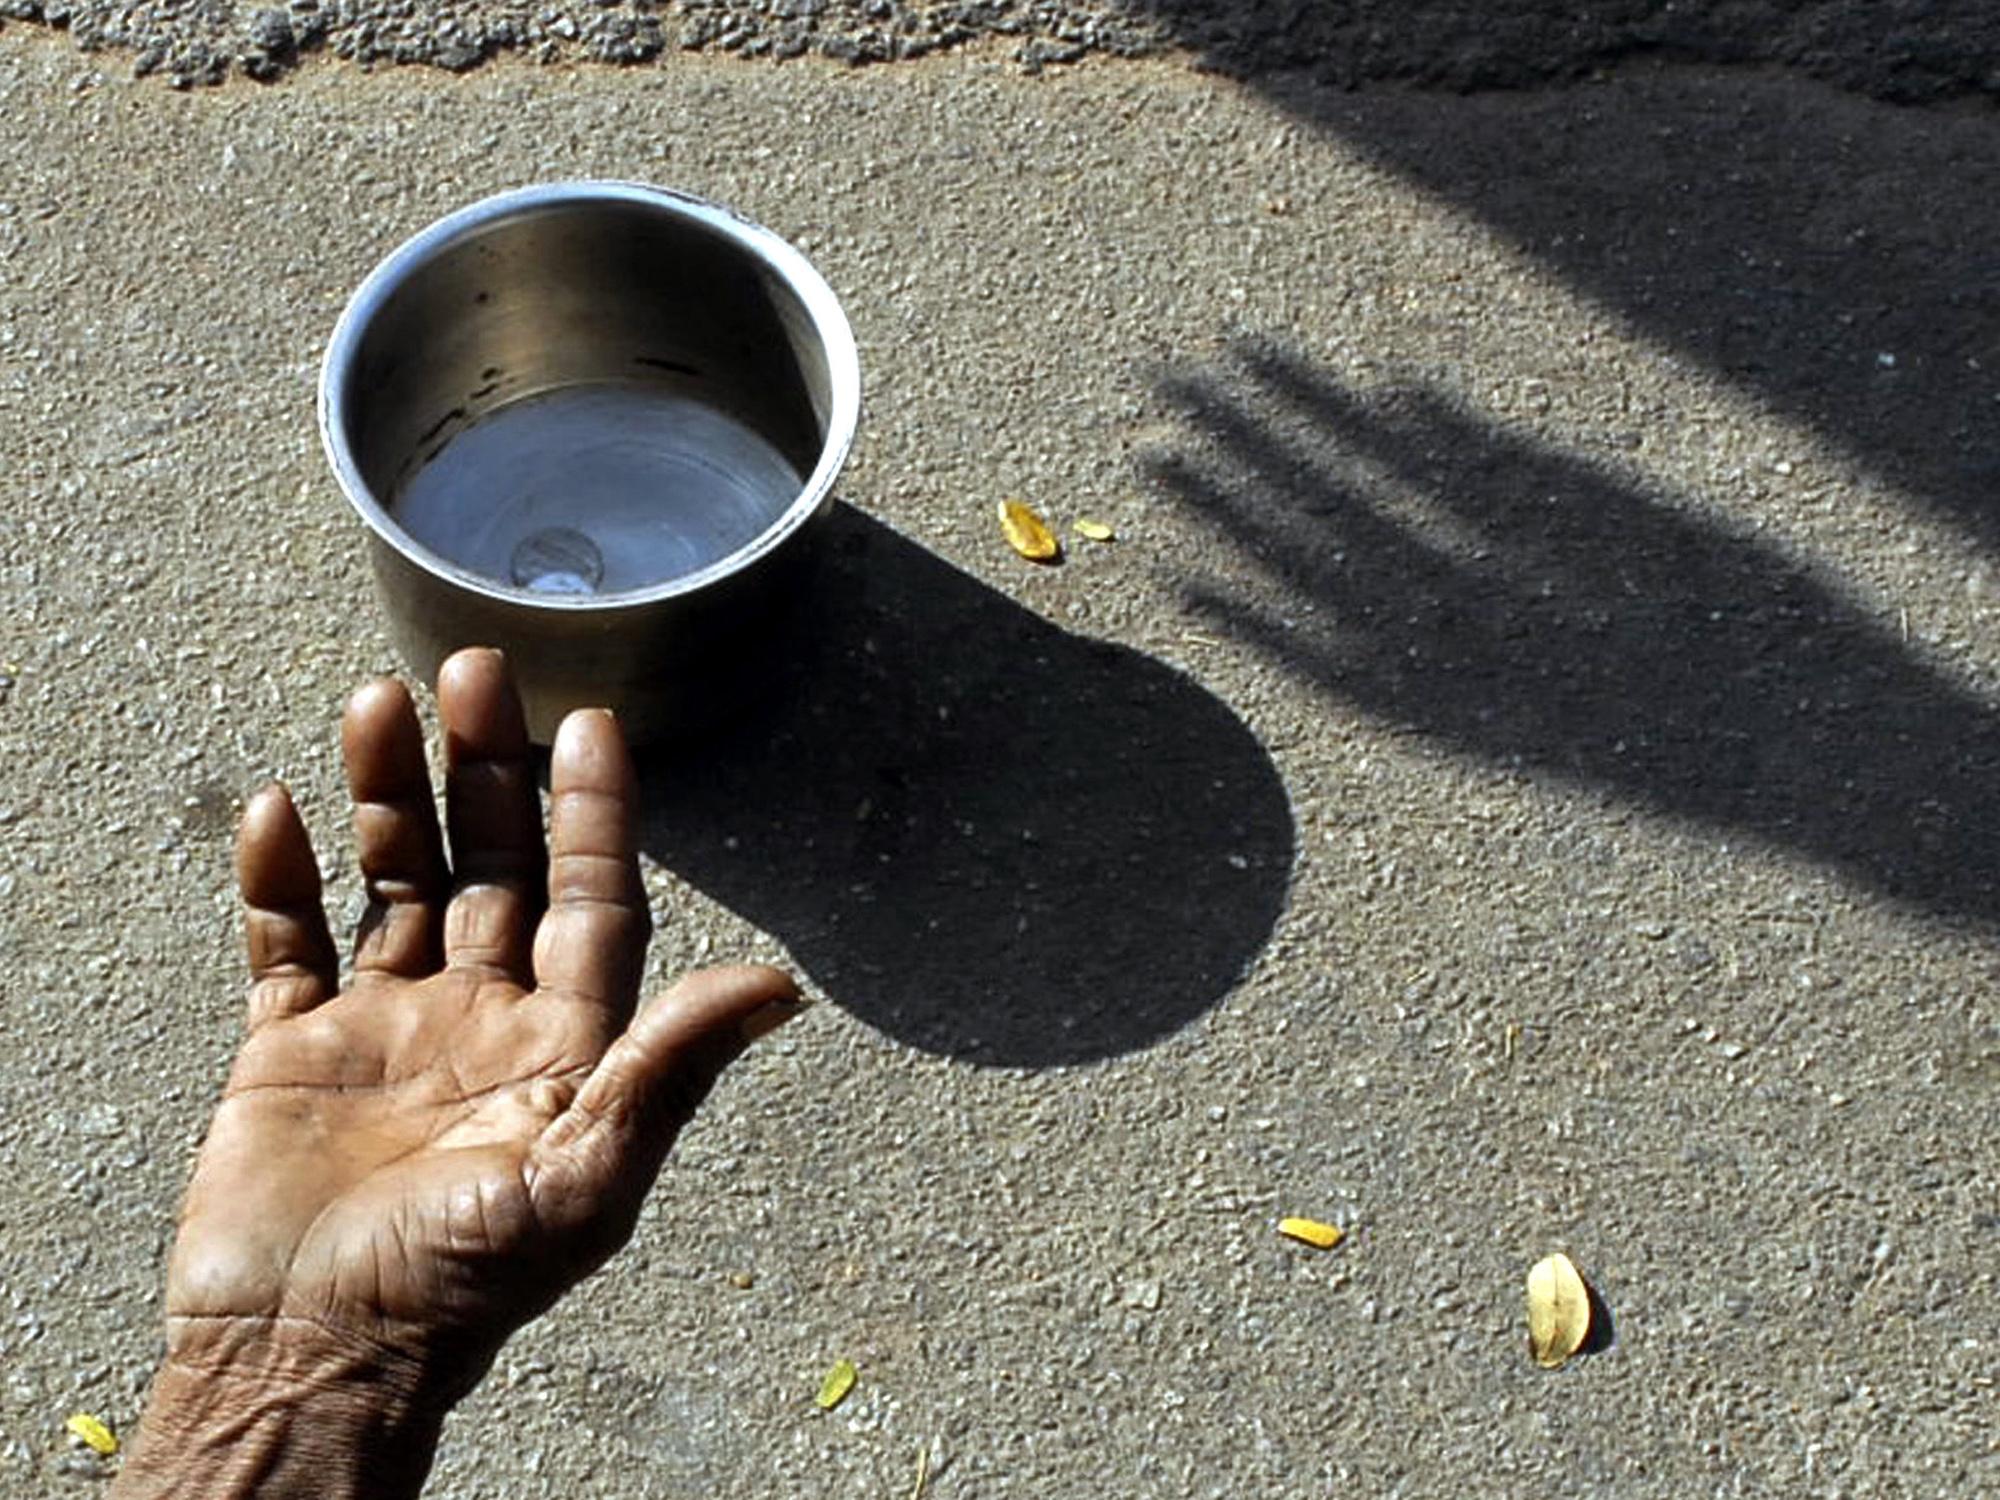 A beggar extends his hand for money at a street in the southern Indian city of Hyderabad